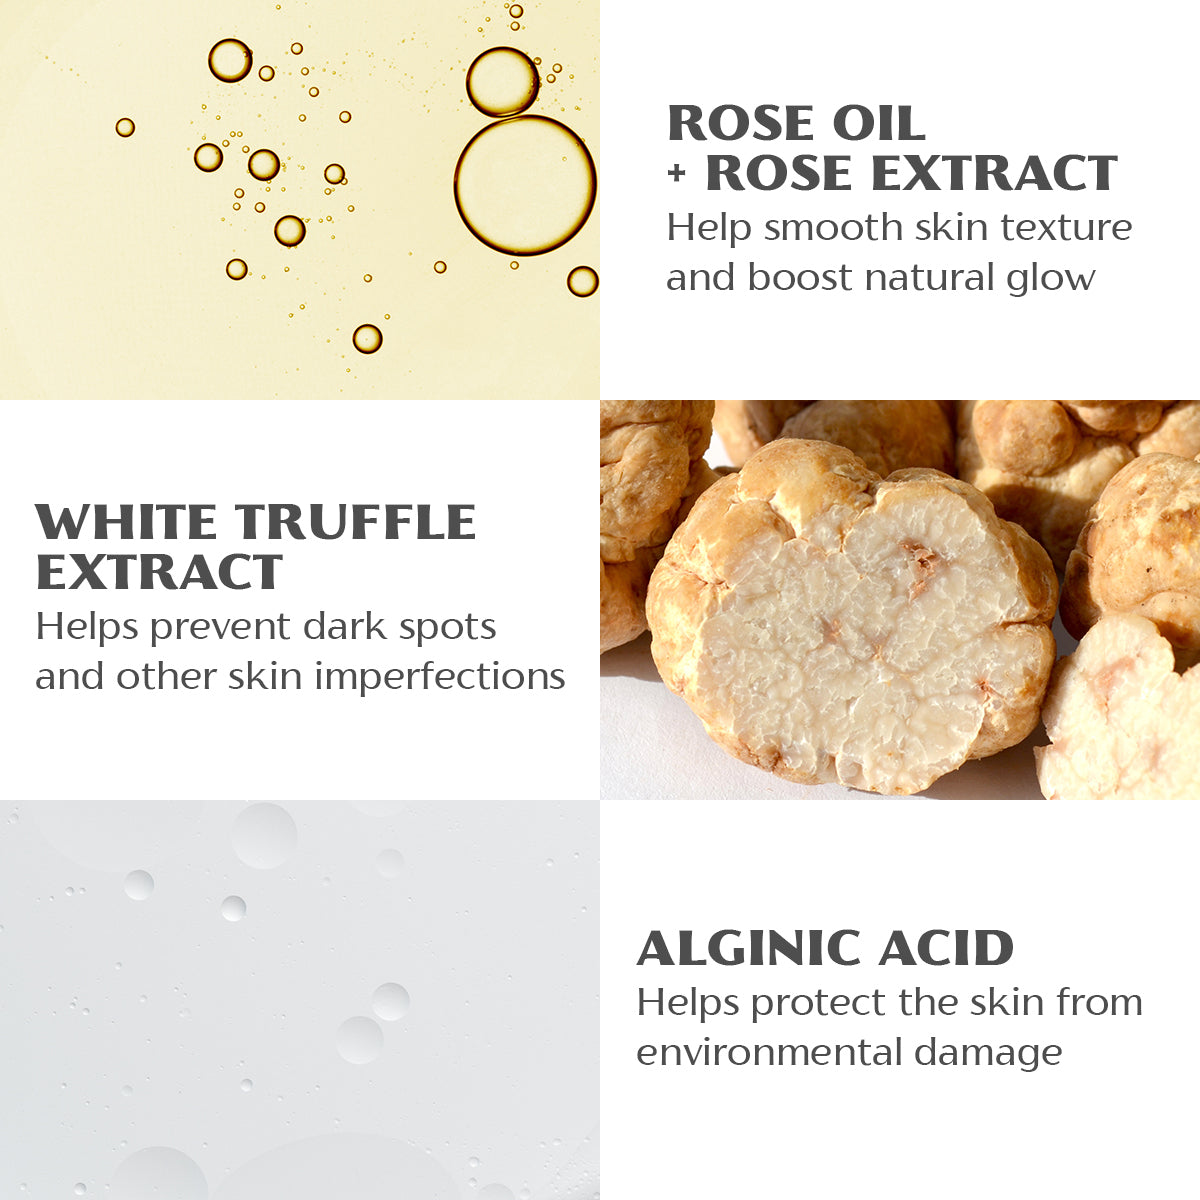 Infographic showcasing various skincare ingredients, including Bio Damascena Rose Otto Ageless Face Cream, white truffle extract, and alginate, for skin health benefits.